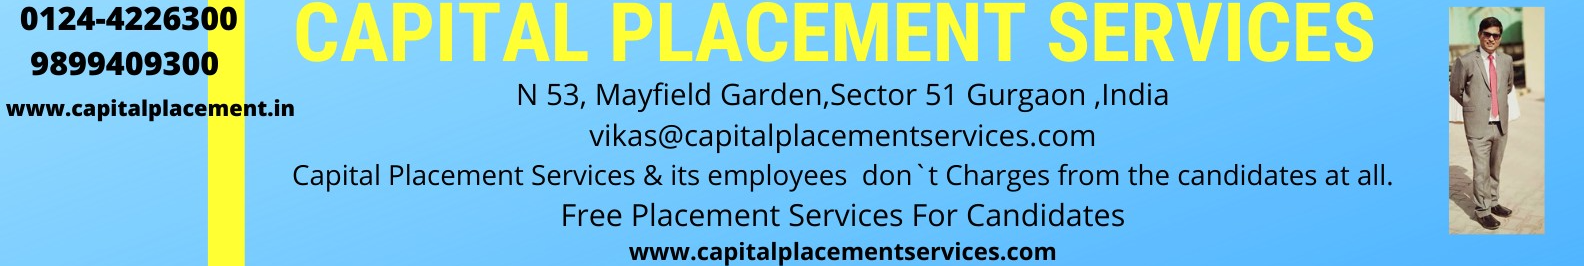 Capital Placement Services background